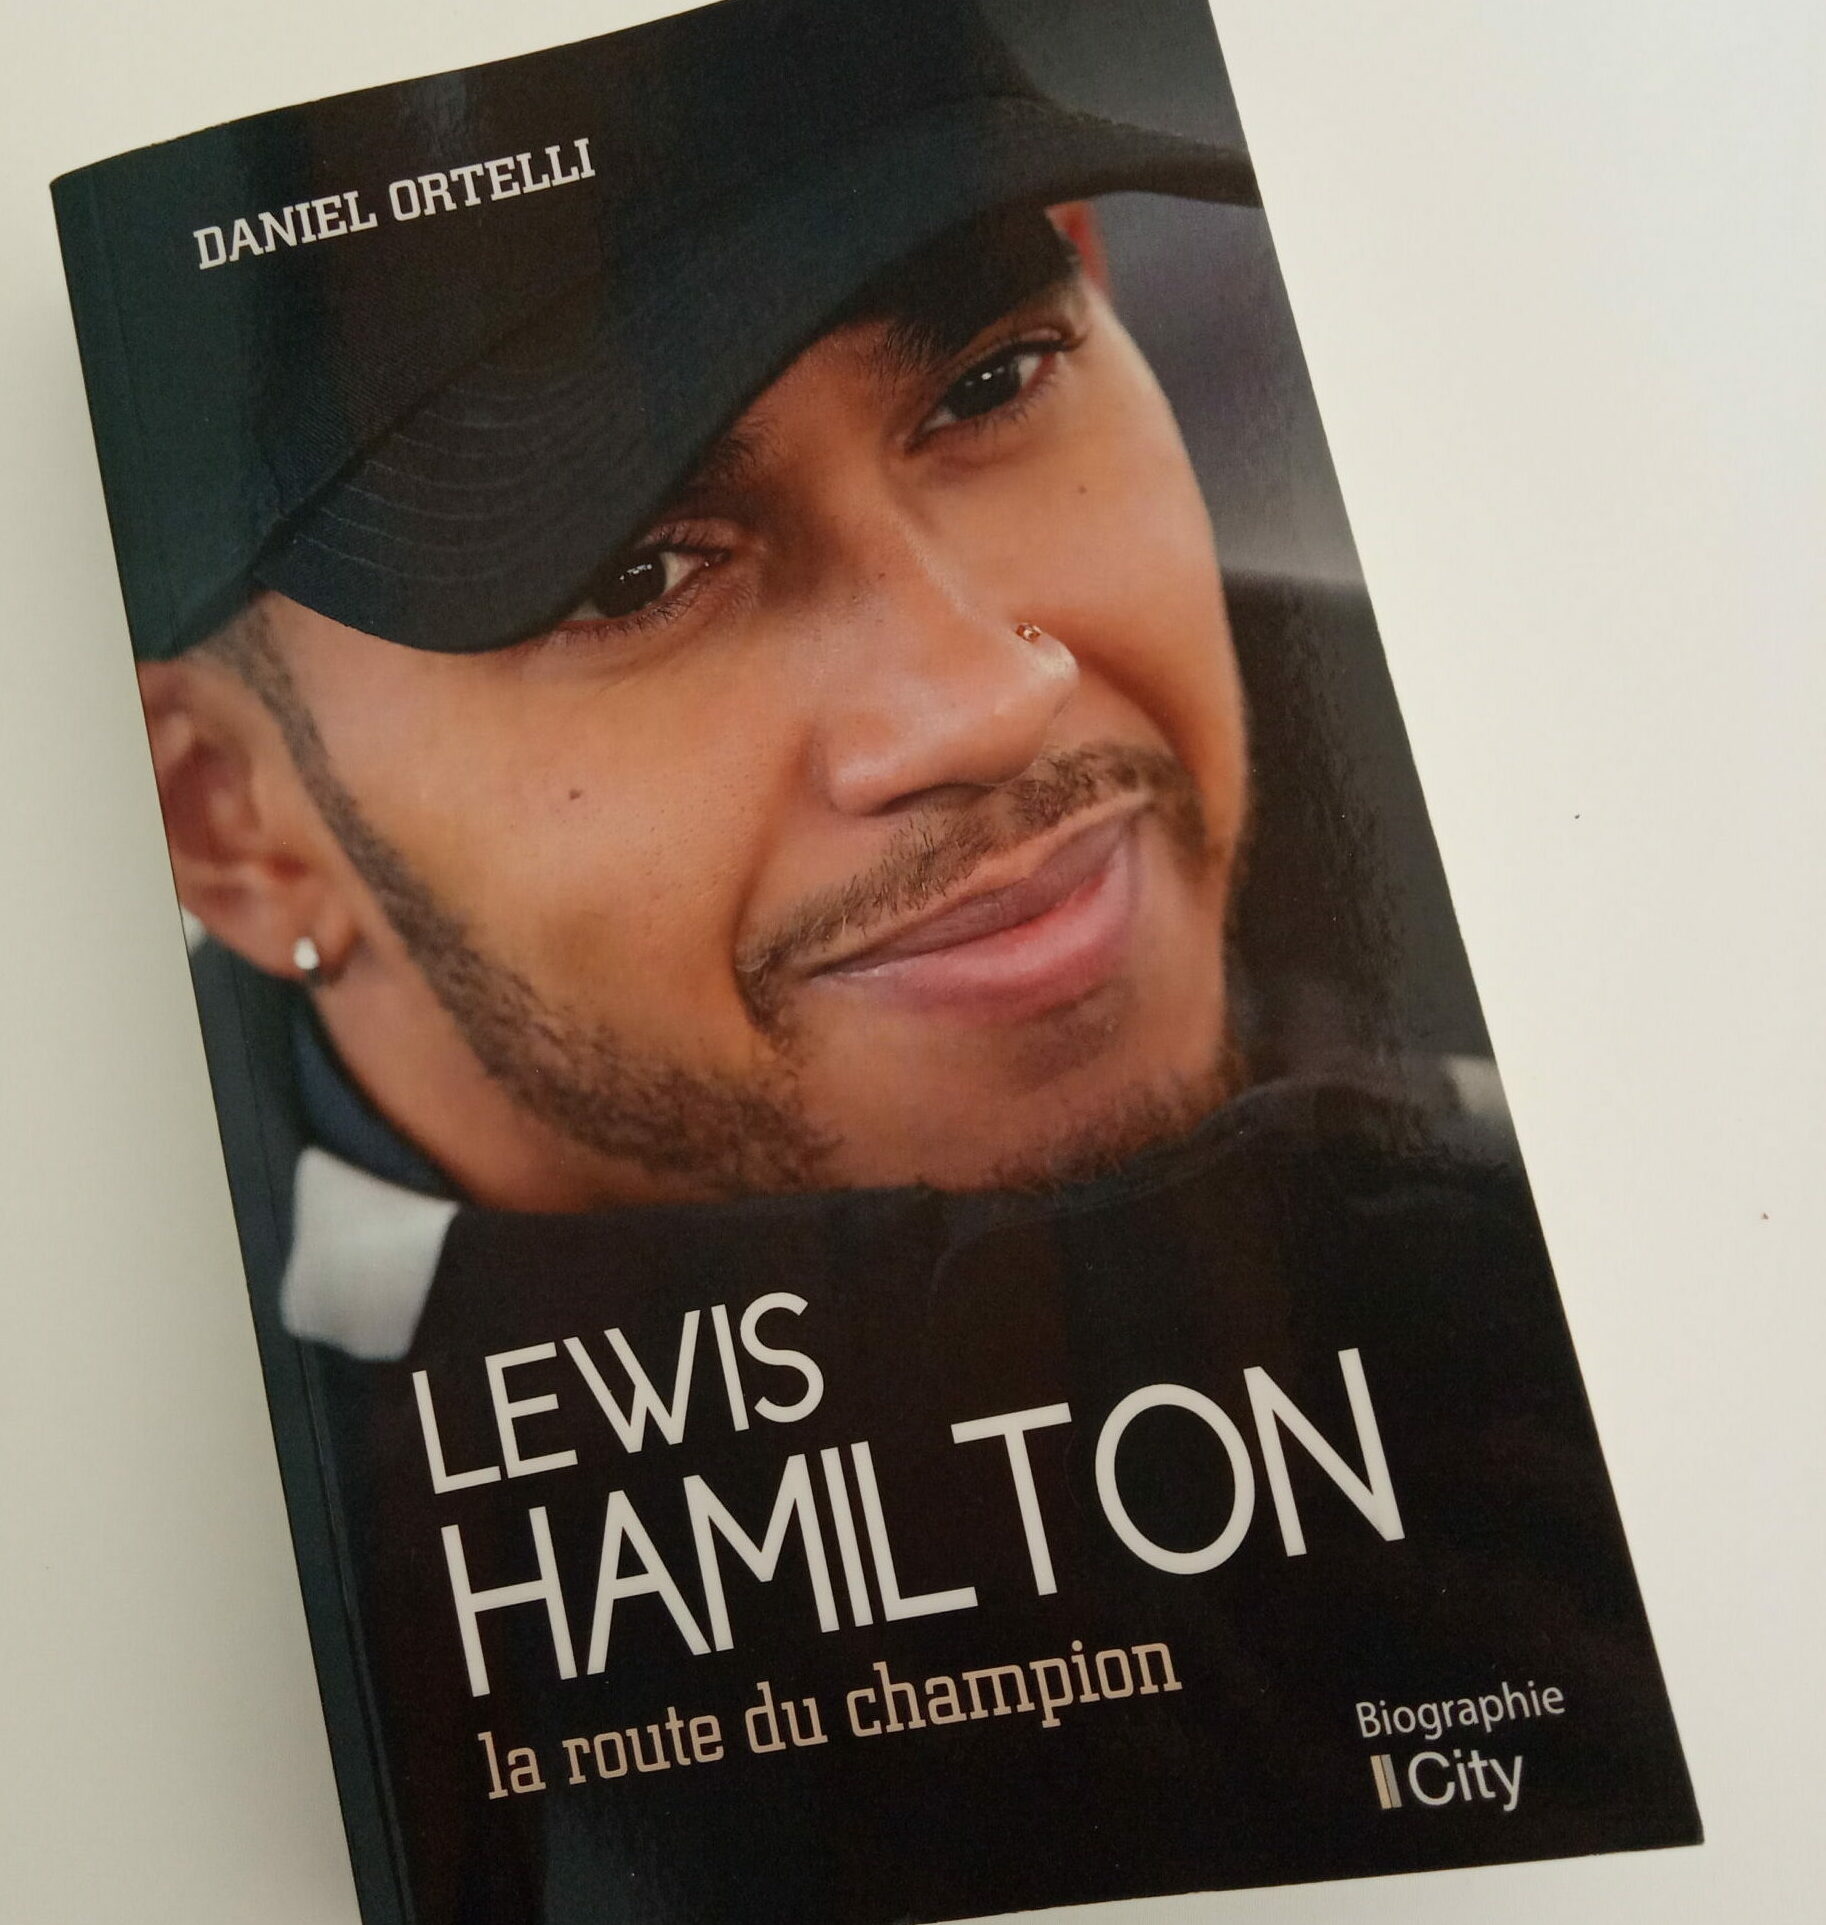 F1- "Lewis Hamilton, the road to the champion" by Daniel Ortelli